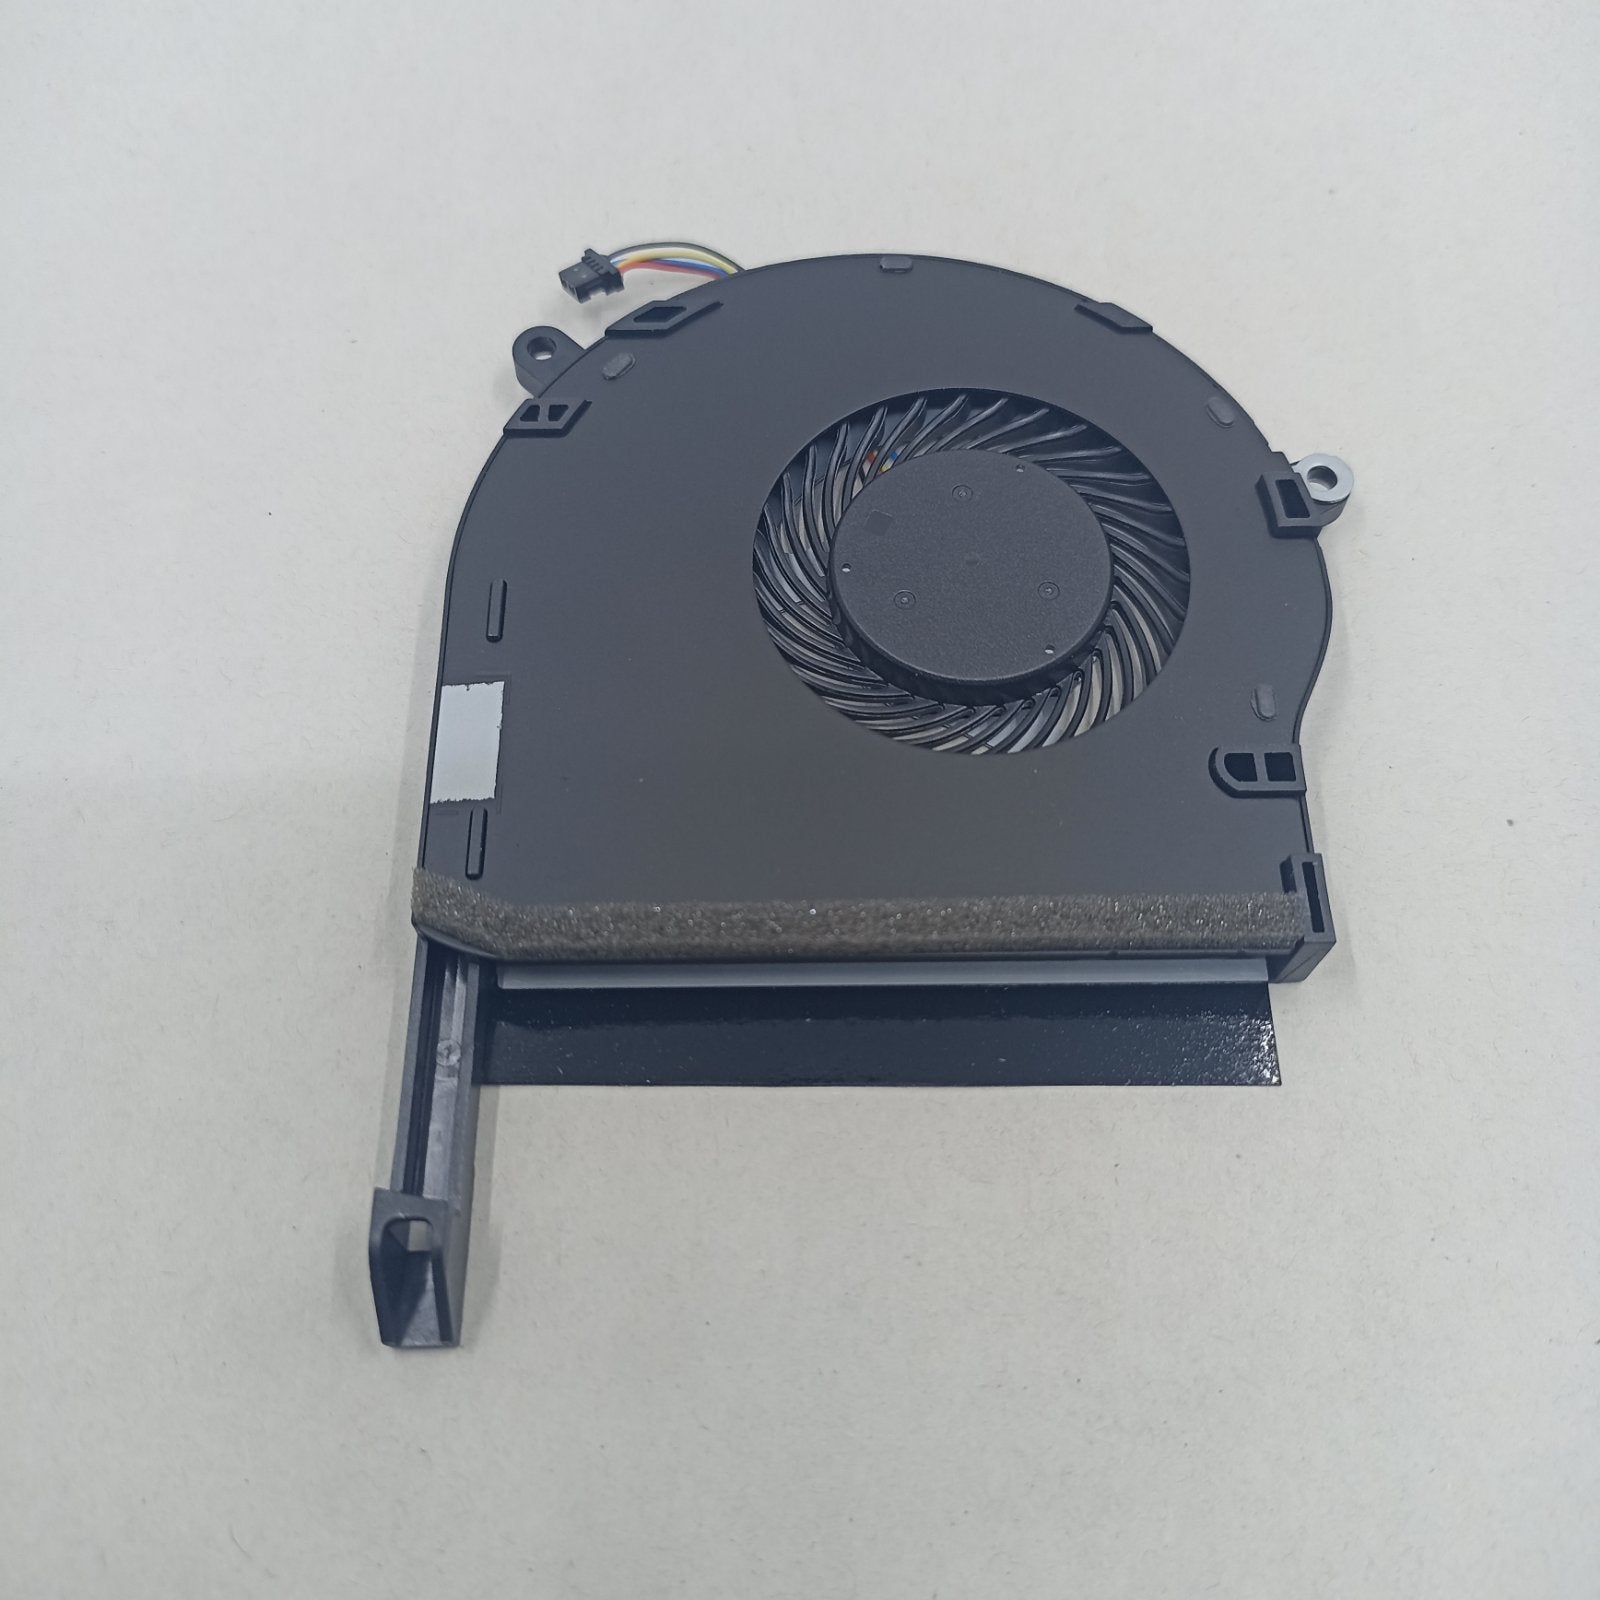 Replacement Fan for Asus FX504GD WL